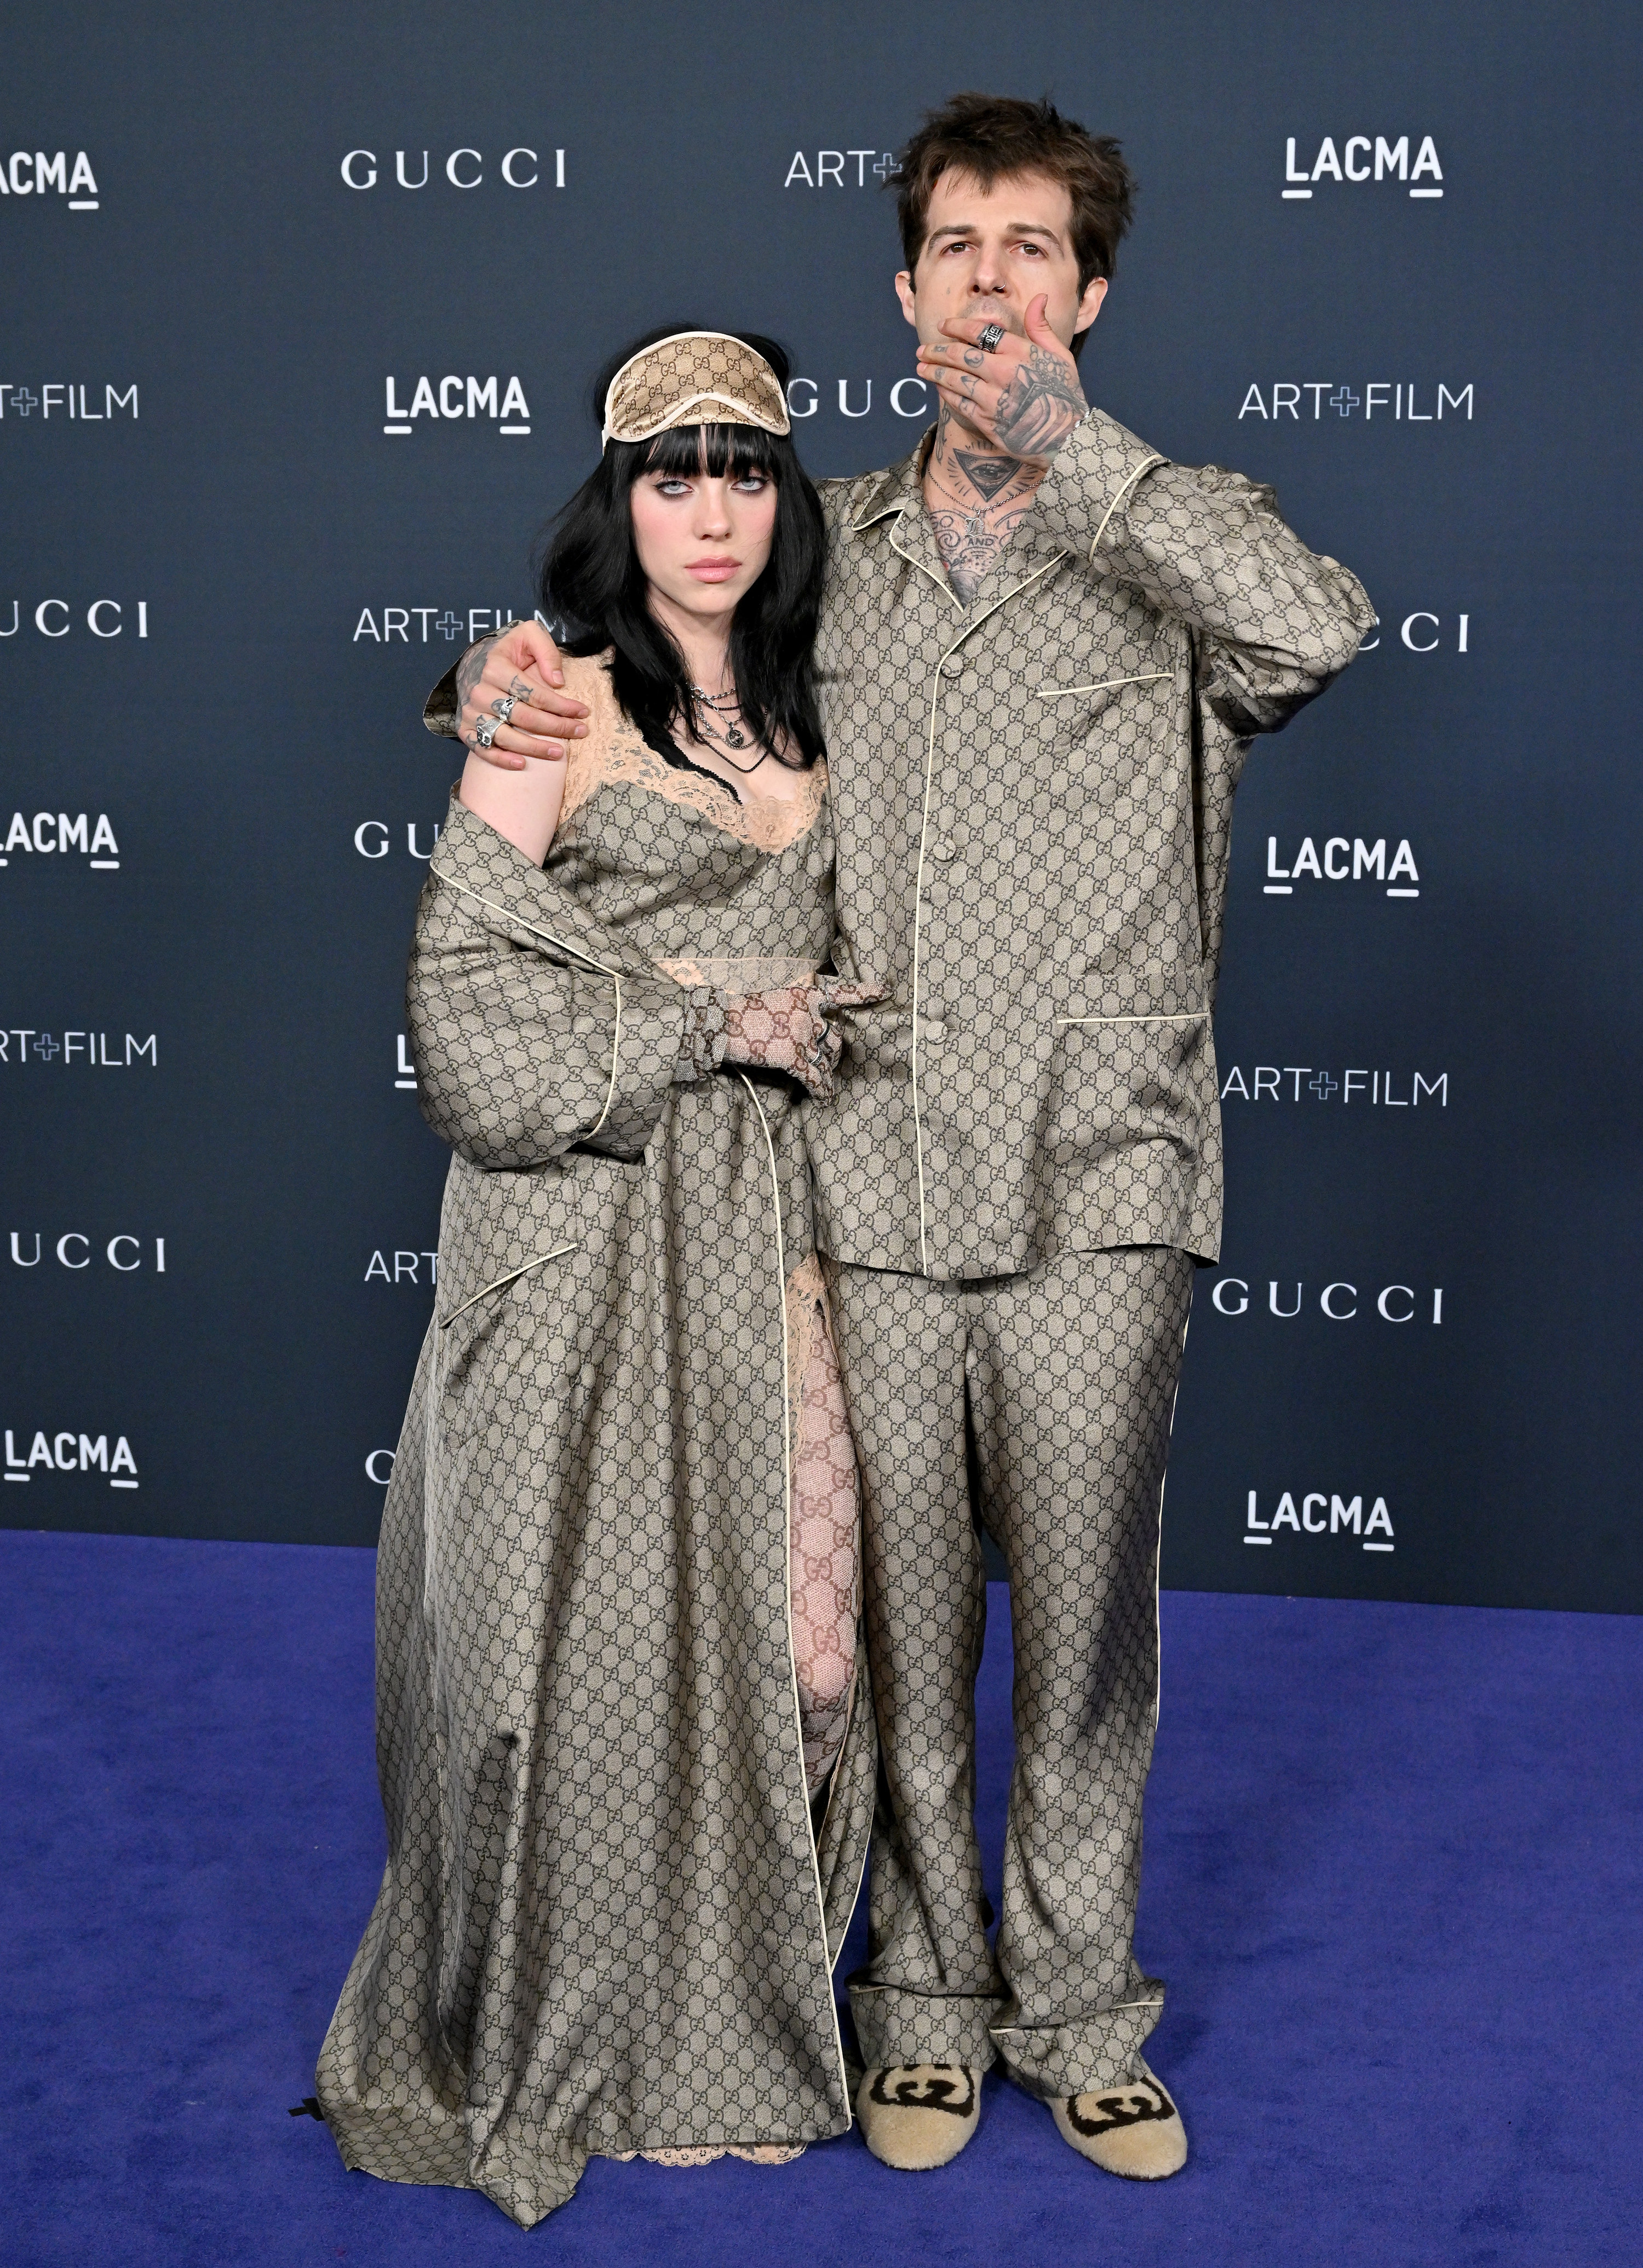 Jesse with his arm around Billie on the red carpet, both wearing matching print outfits